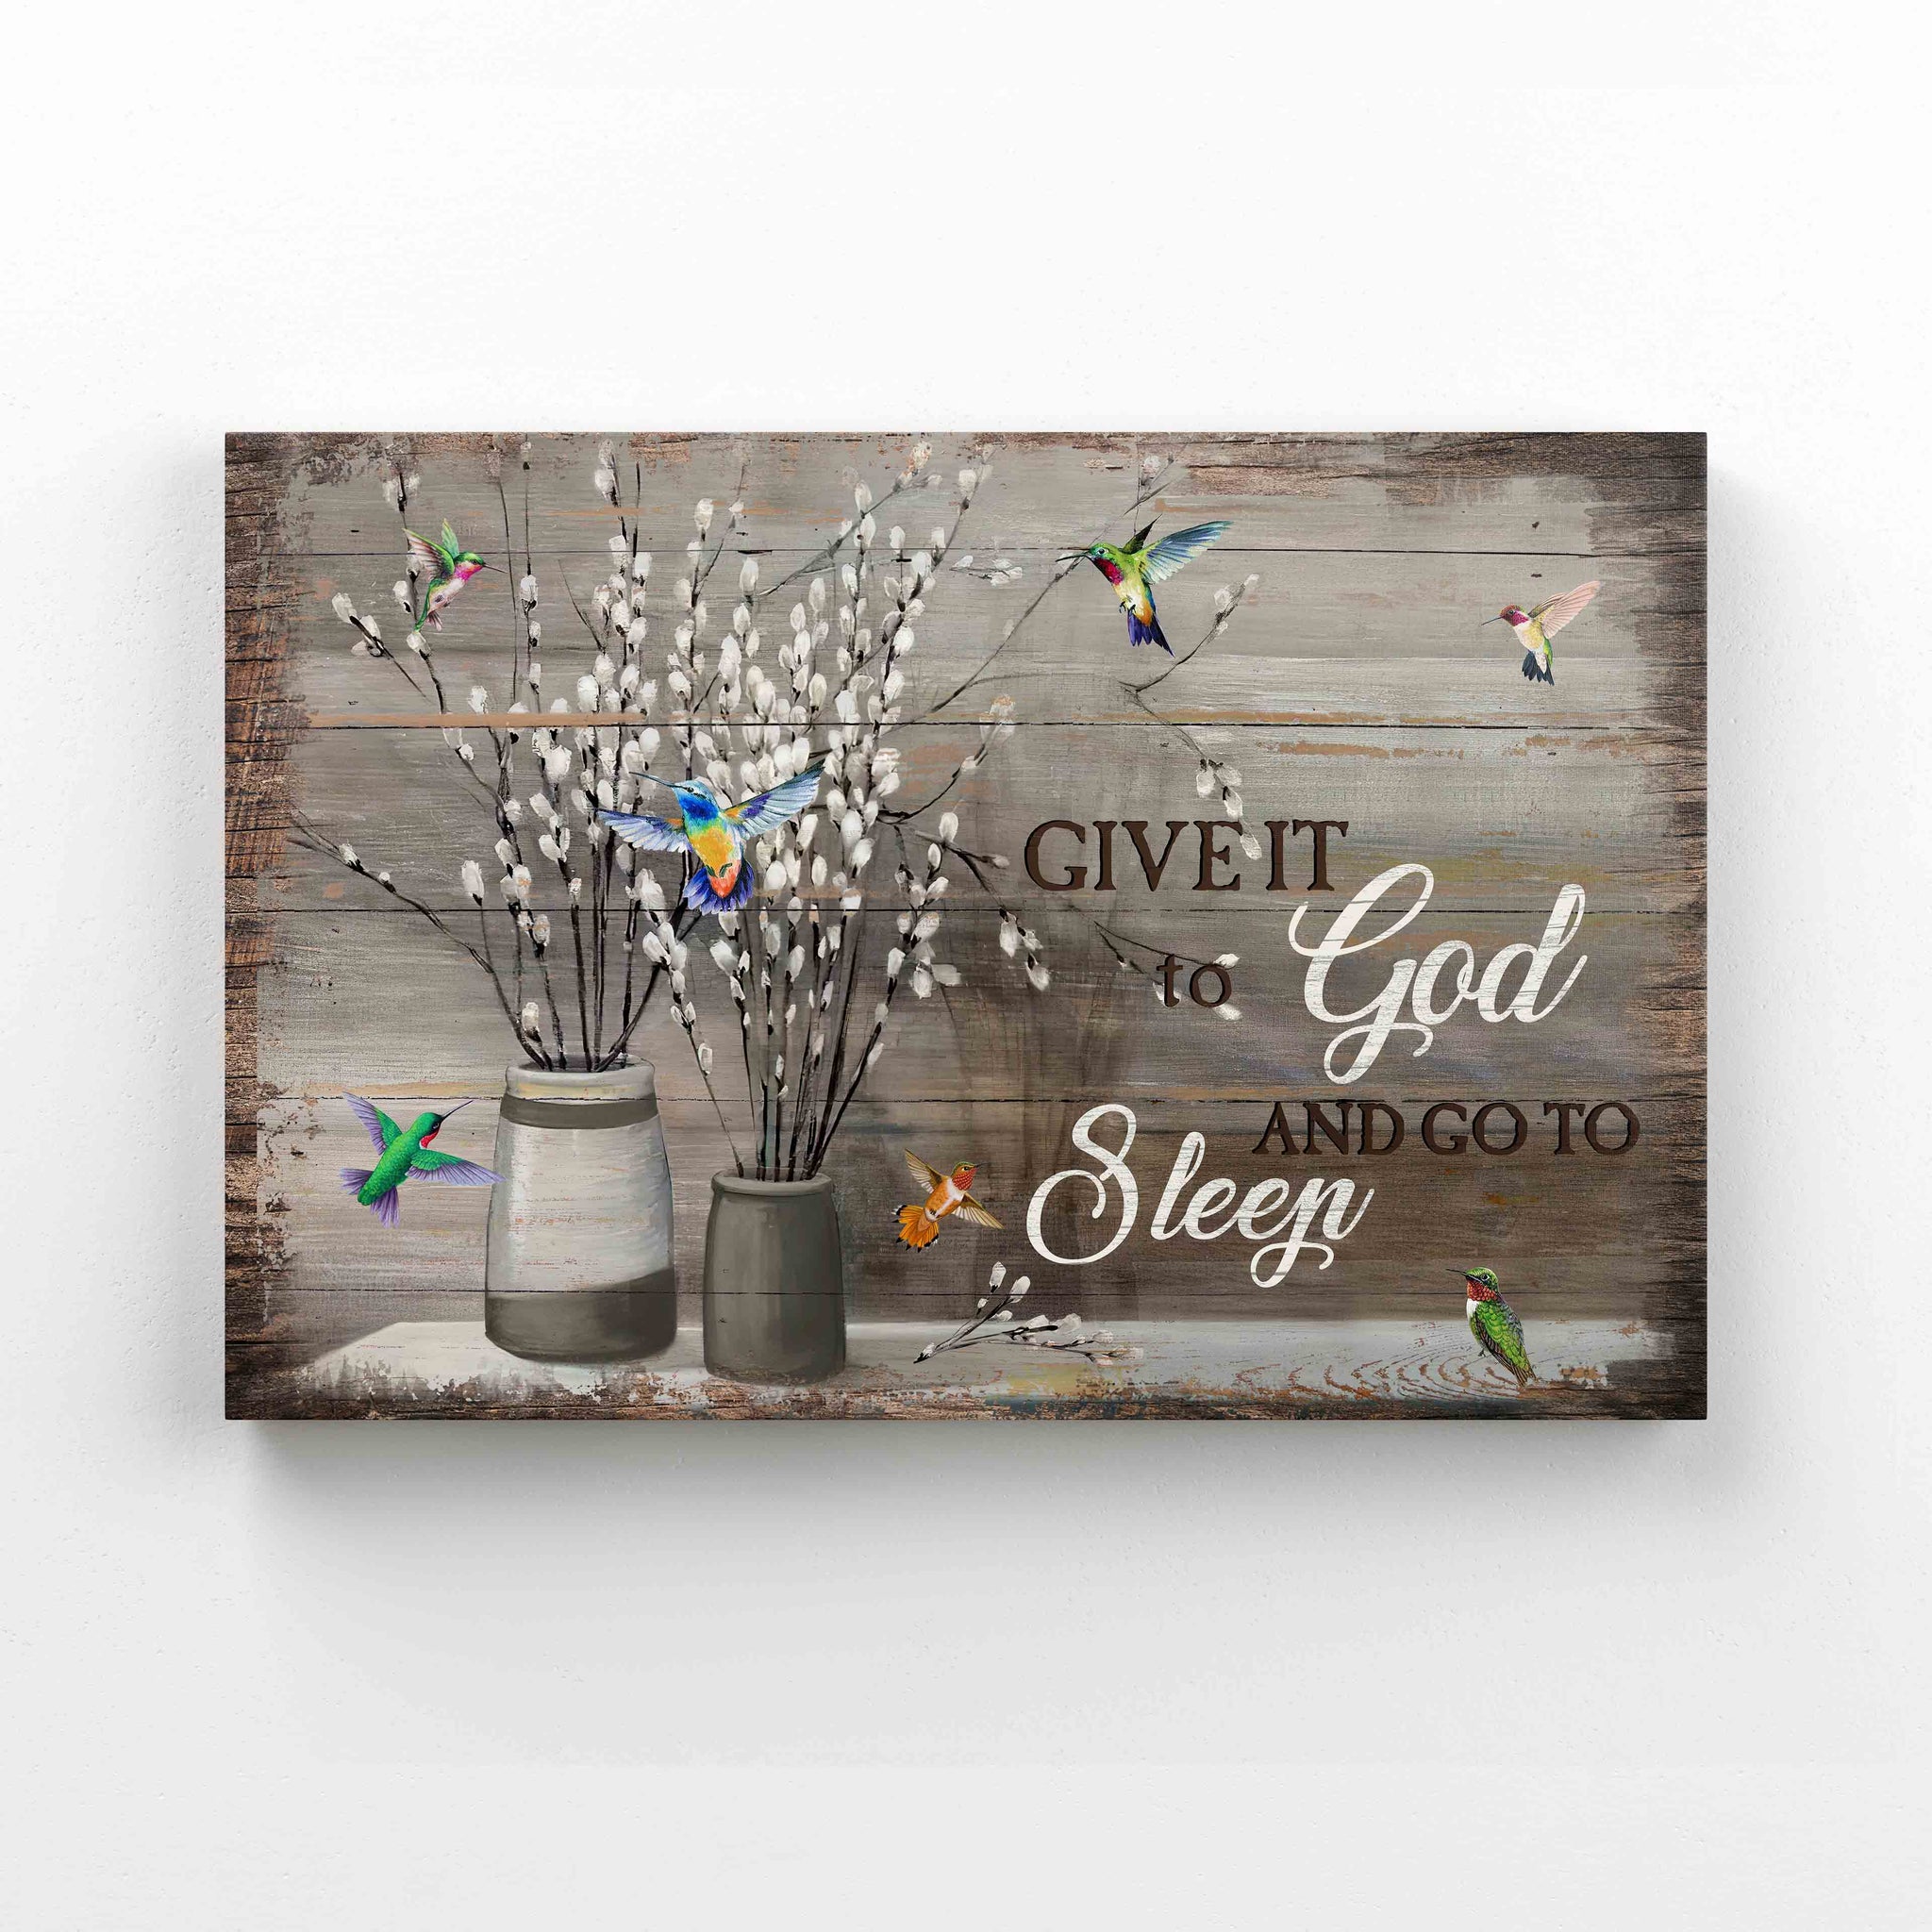 Give It To God And Go To Sleep, Pussy Willow Canvas, Humming Bird Canvas, Wall Art Canvas, God Canvas